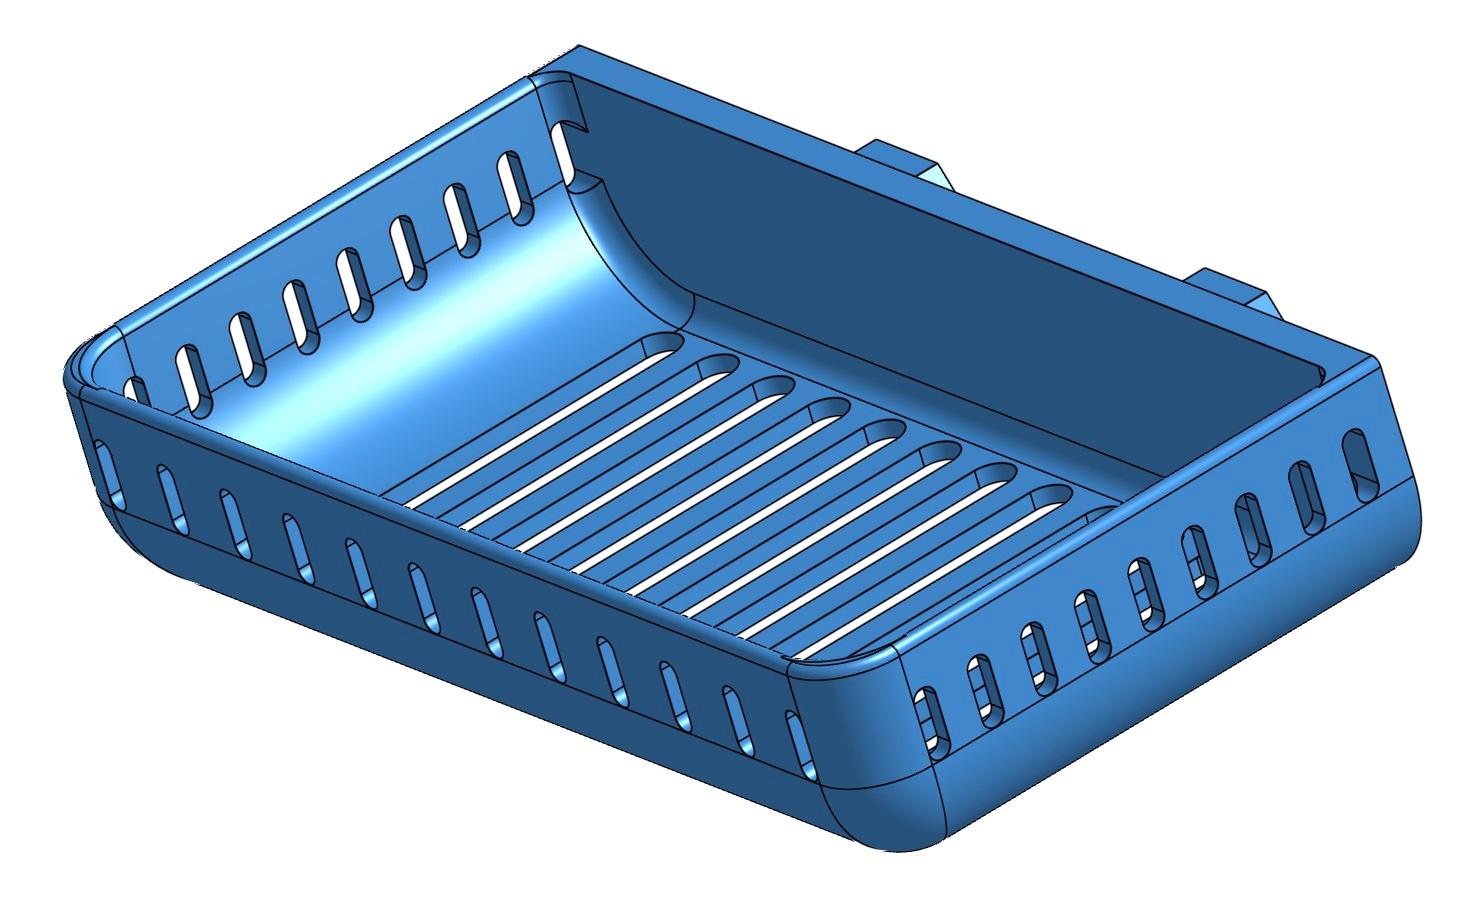 HSW Small Tray 3d model